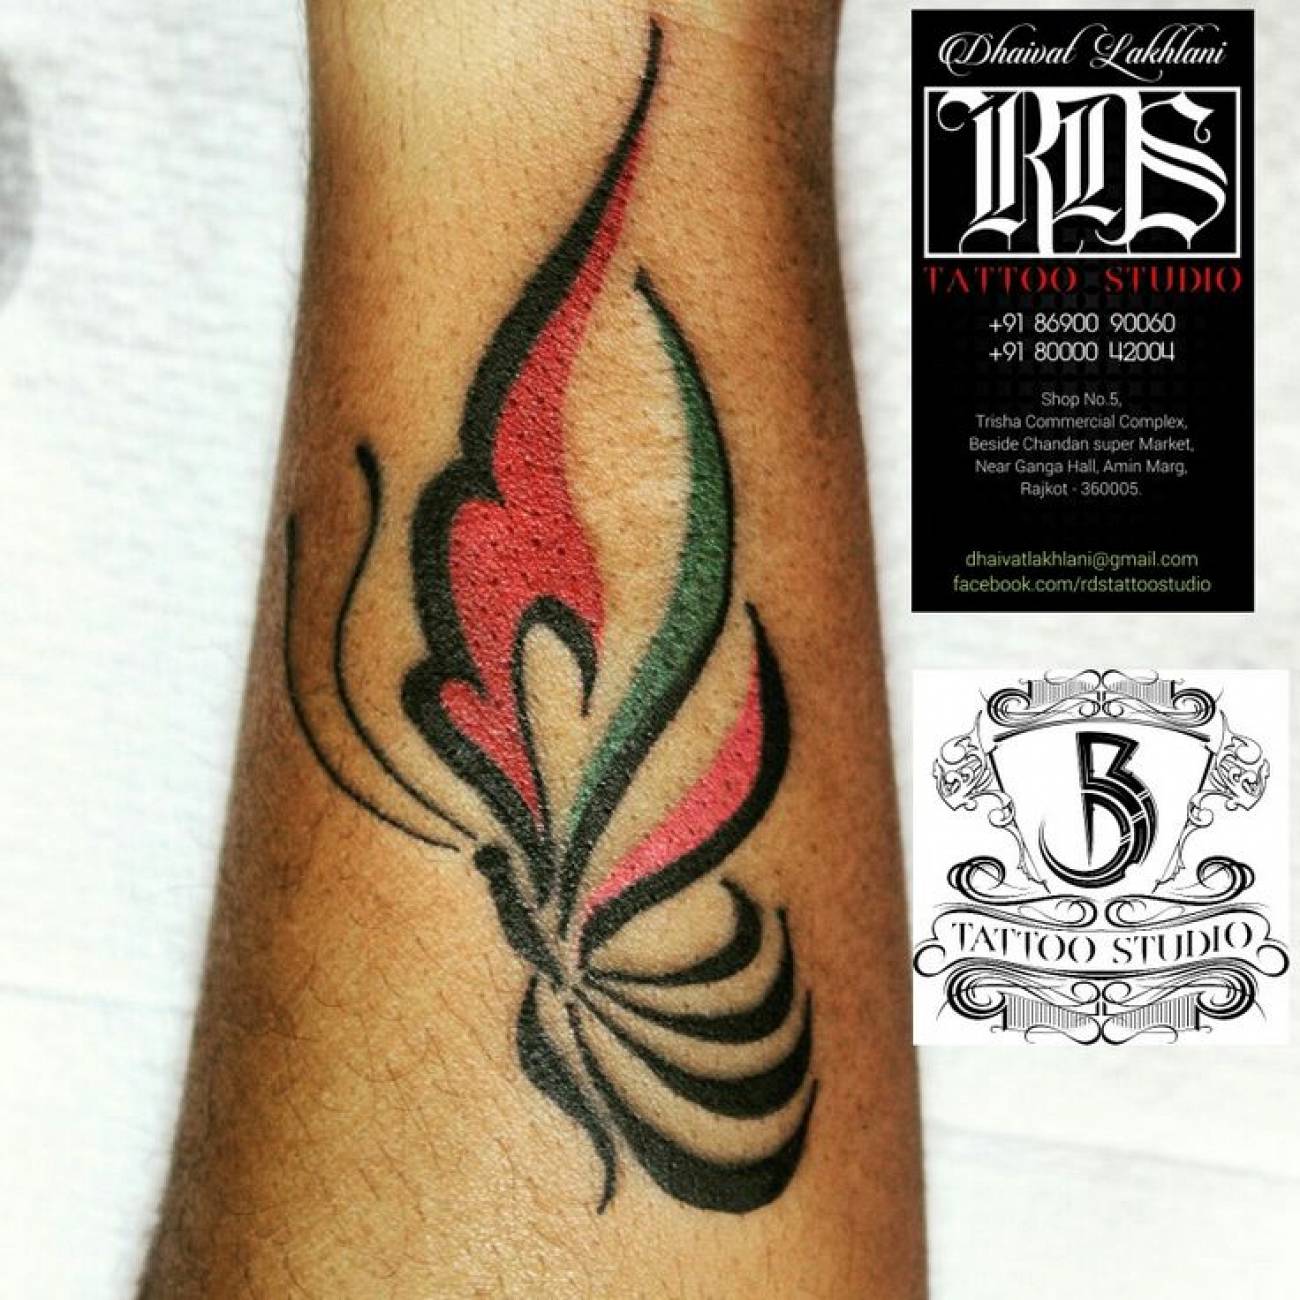 kings tattoo supply surat – Beauty Salon in Surat, reviews, prices –  Nicelocal-cheohanoi.vn